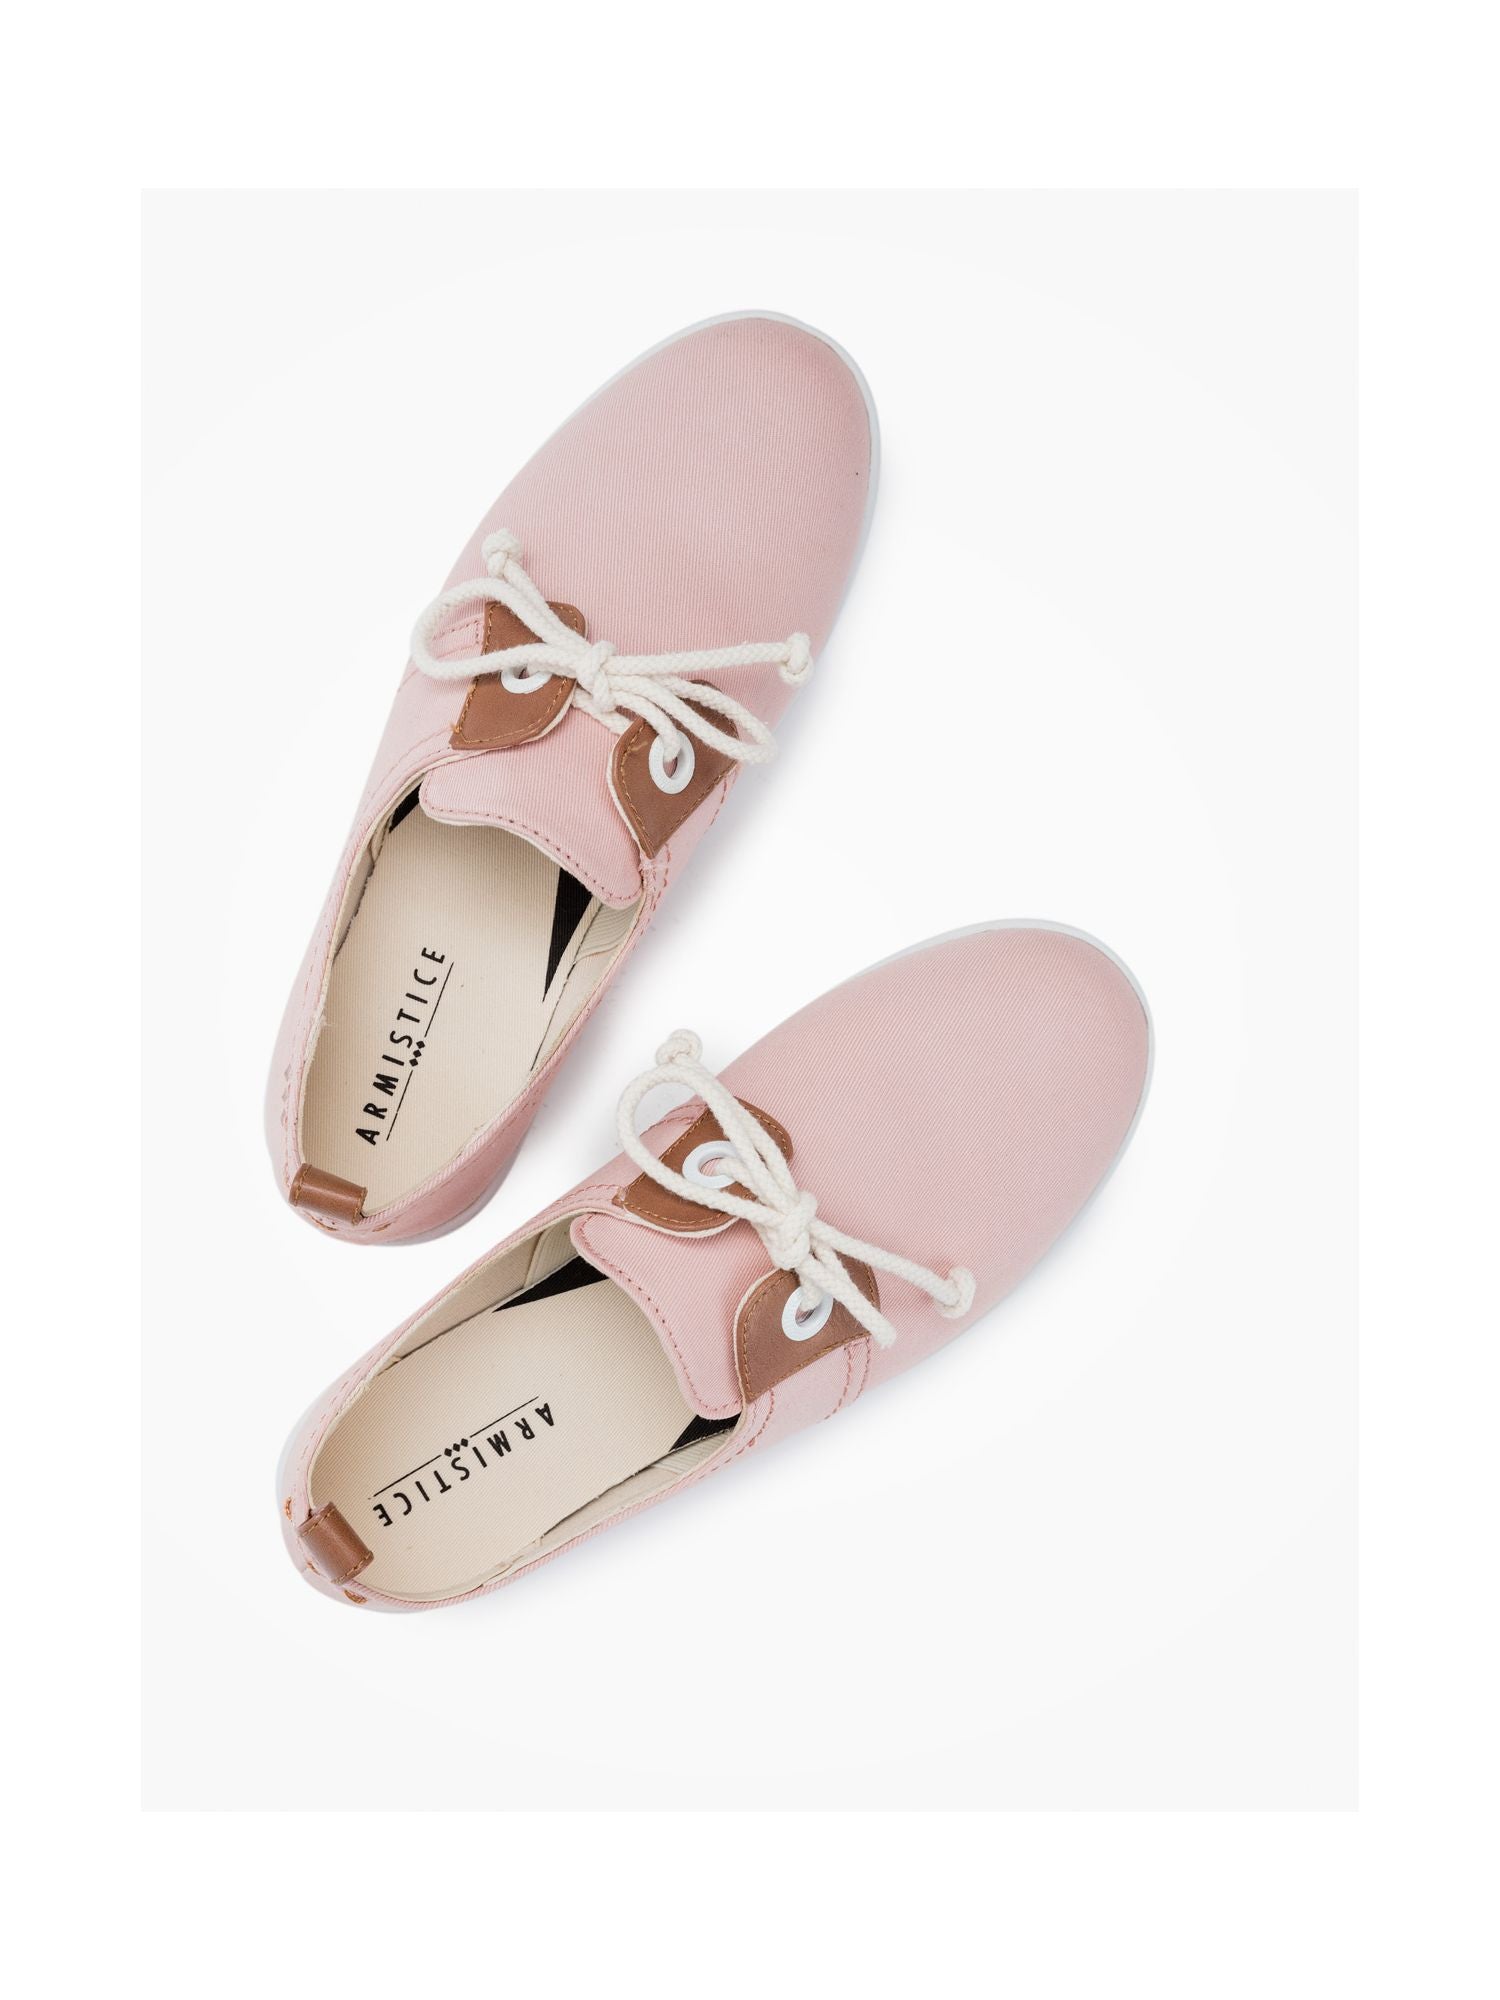 This minimalist Made-in-France sneaker comes packed with neo-retro style which complements beautifully its nautical inspiration with oversized golden eyelets and leather yokes. Is available in different colours, here in light rose.